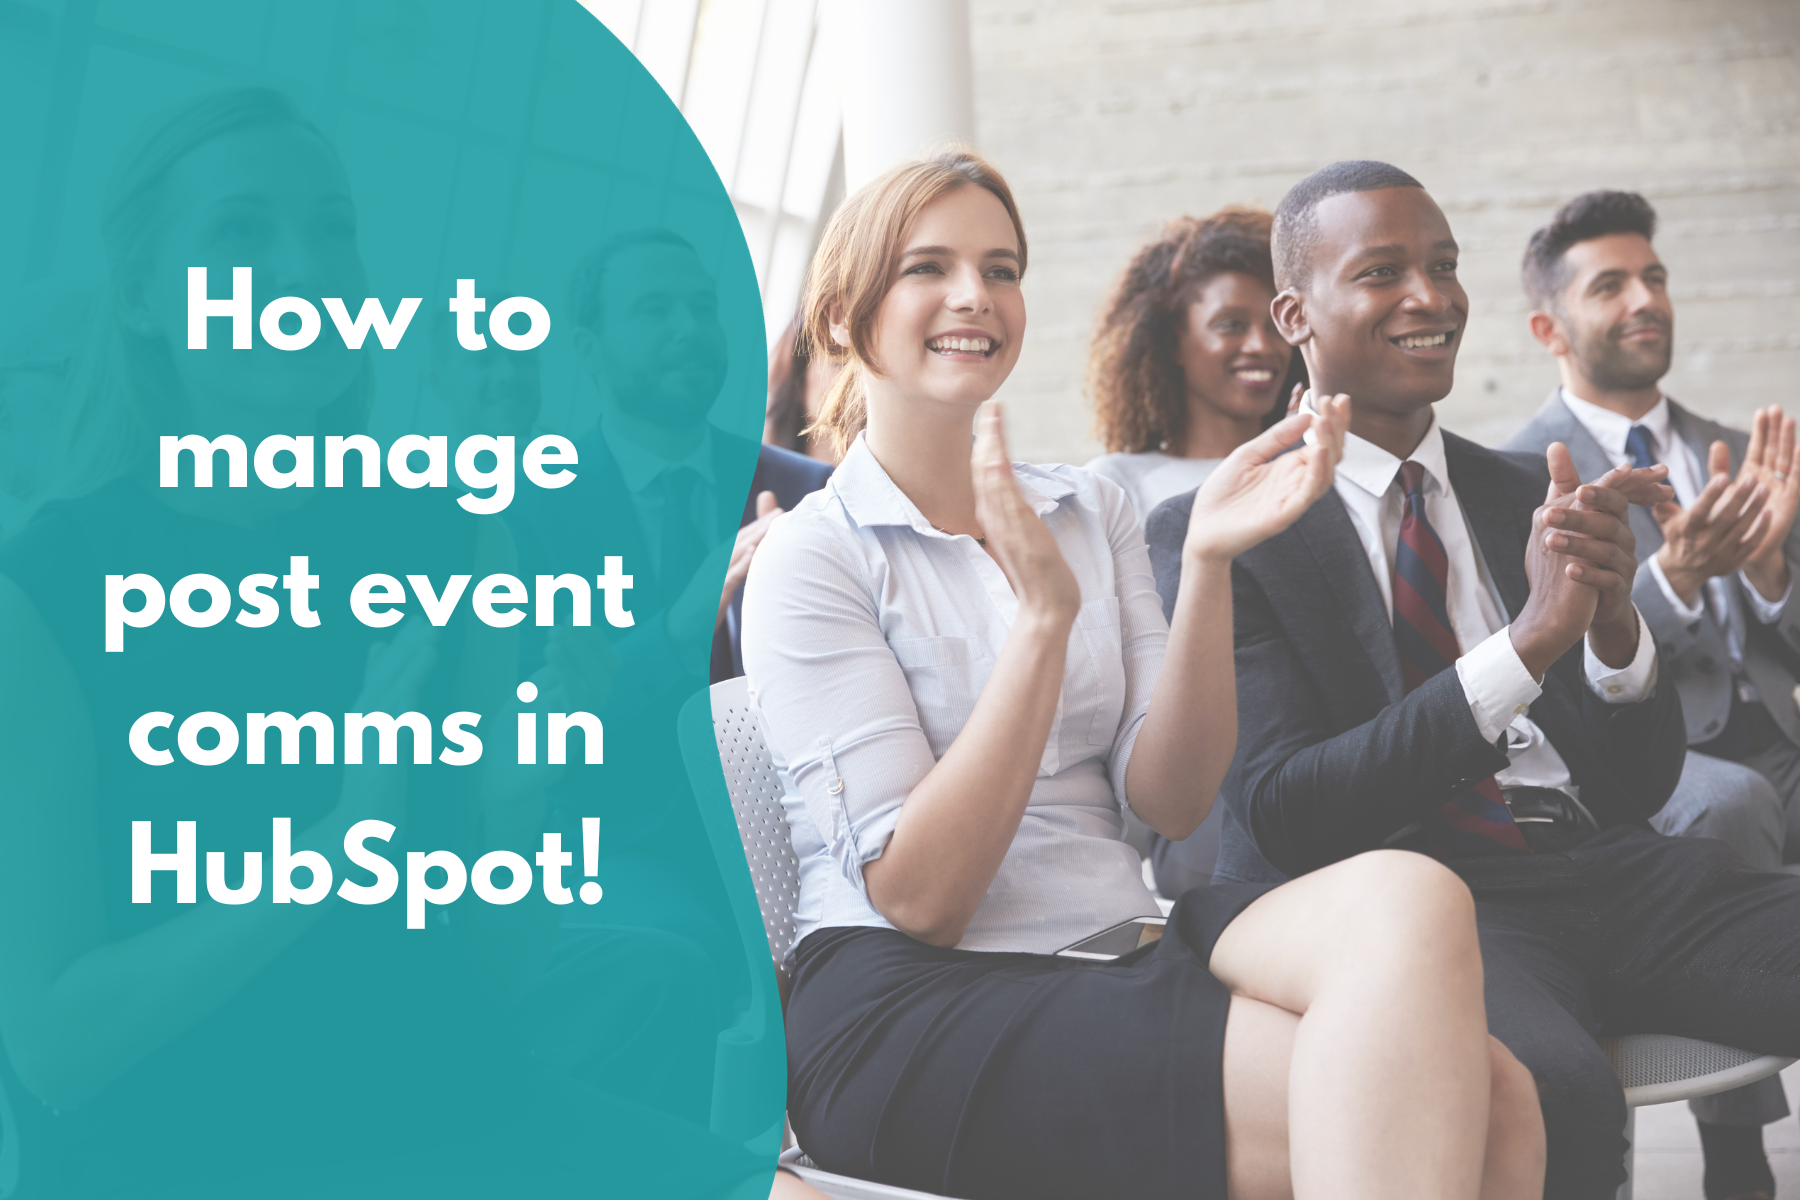 How to manage post-event communications more effectively